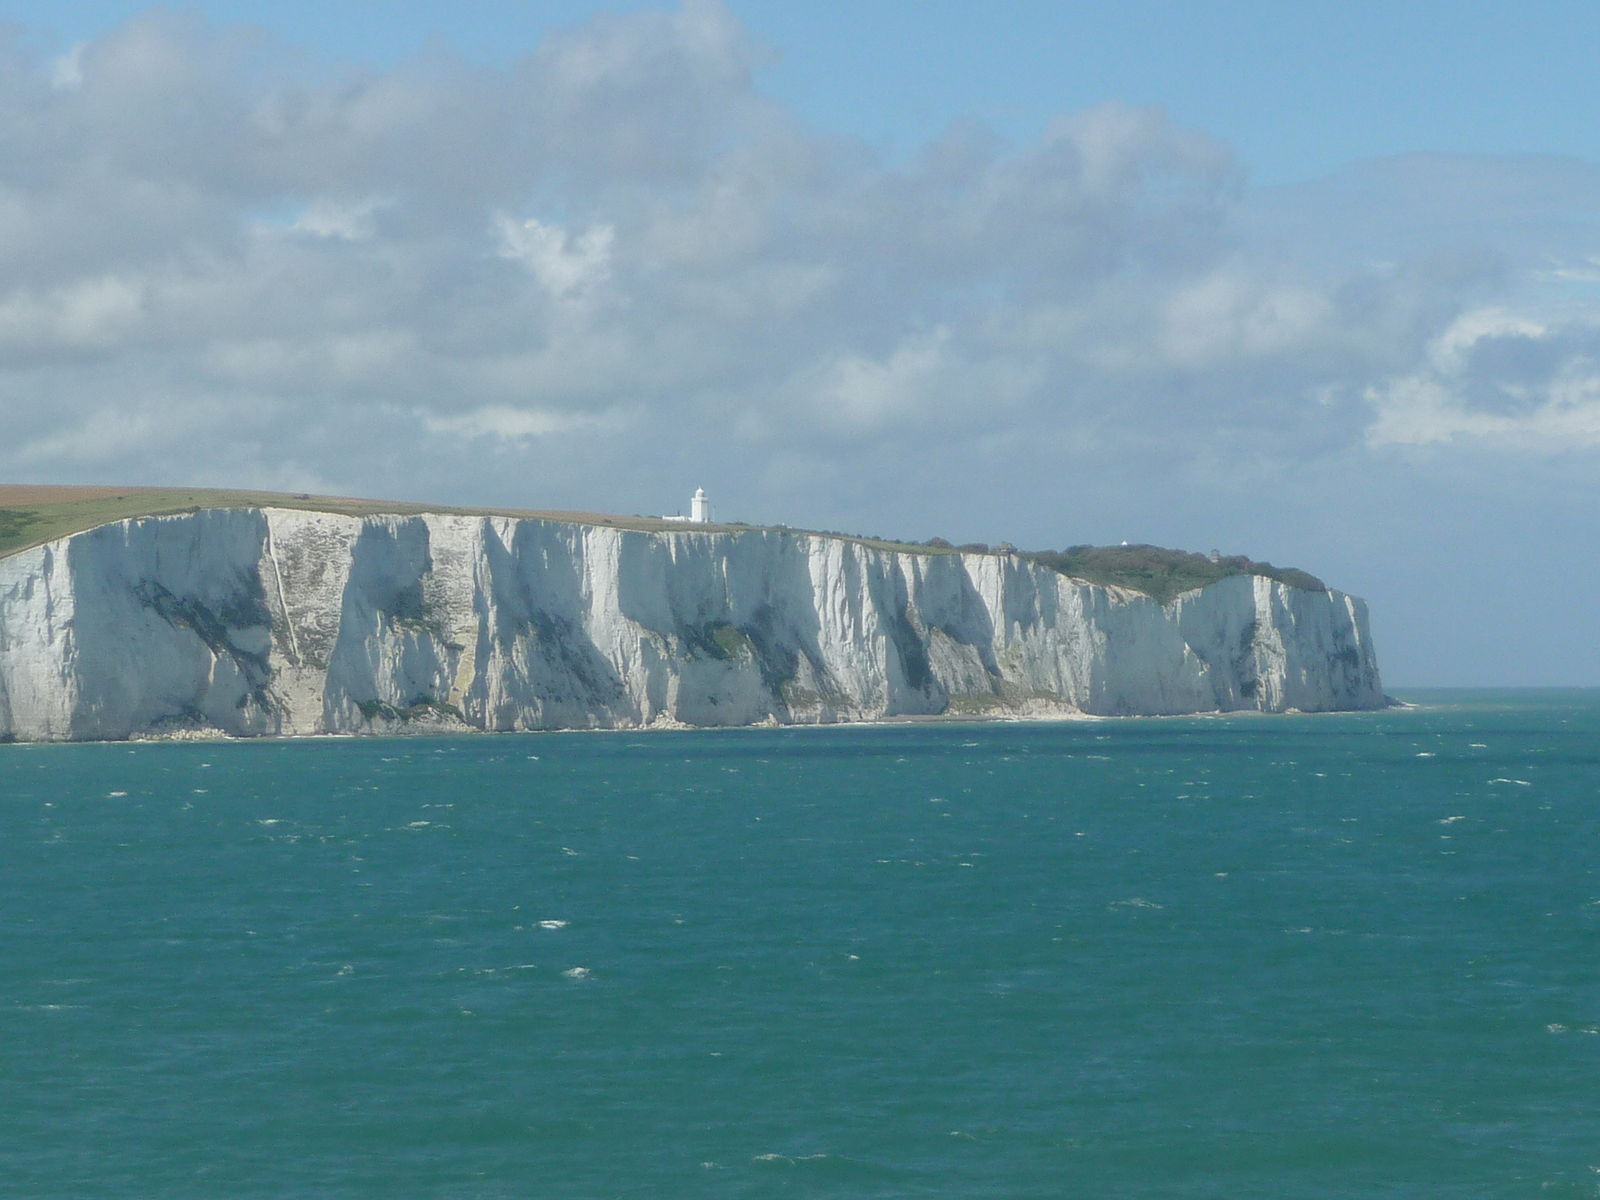 white cliffs shown from the ocean